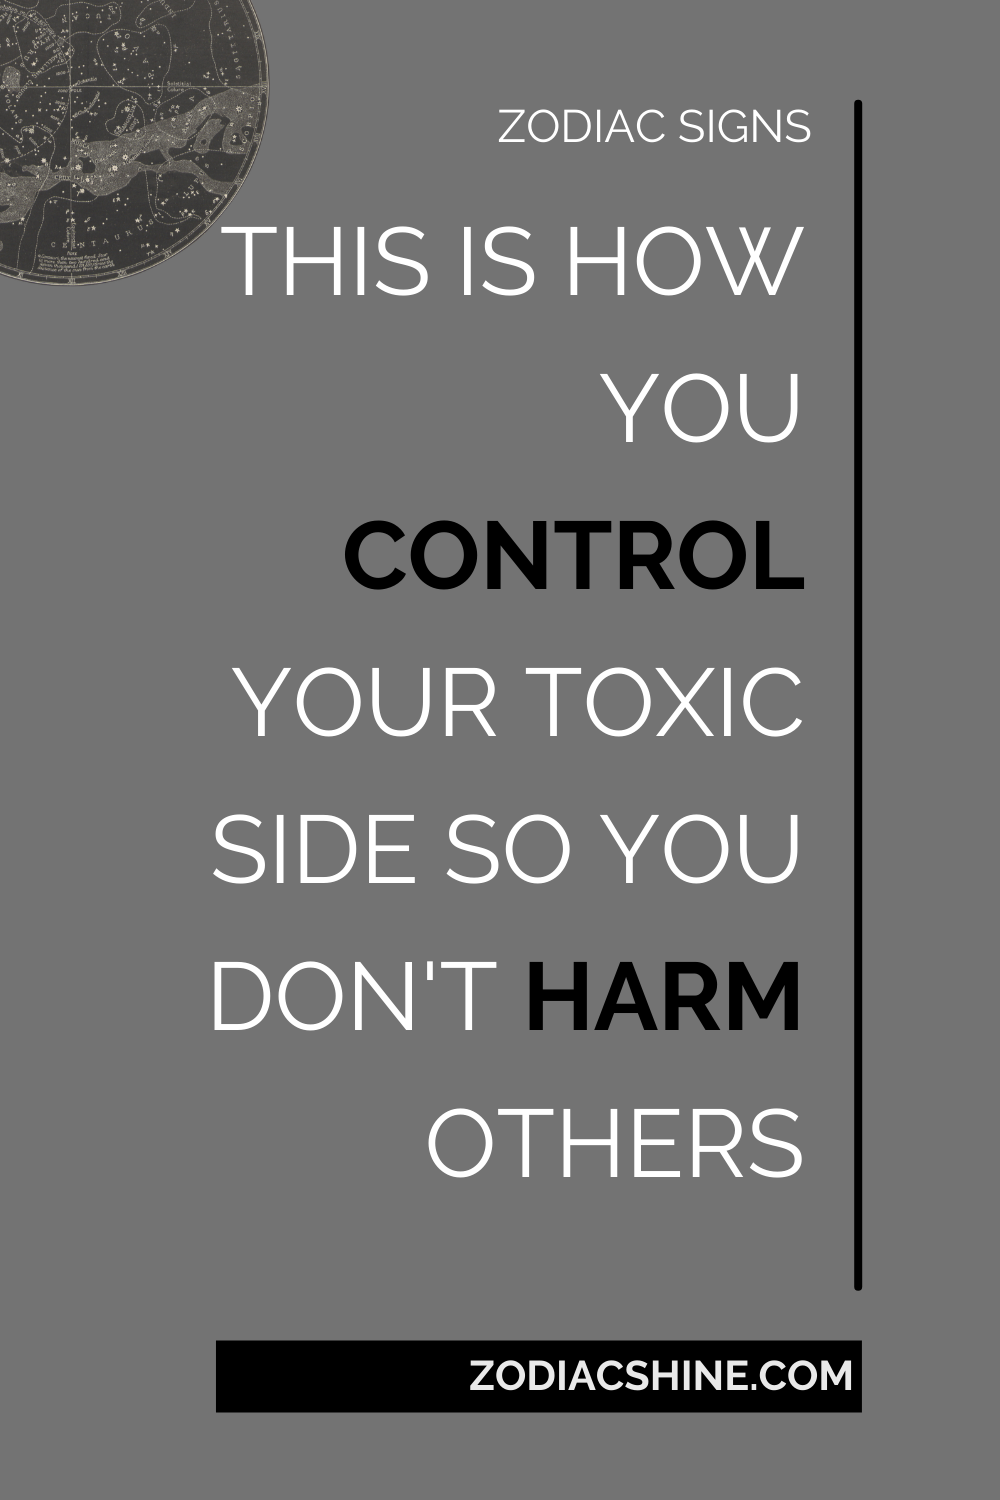 THIS IS HOW YOU CONTROL YOUR TOXIC SIDE SO YOU DON'T HARM OTHERS